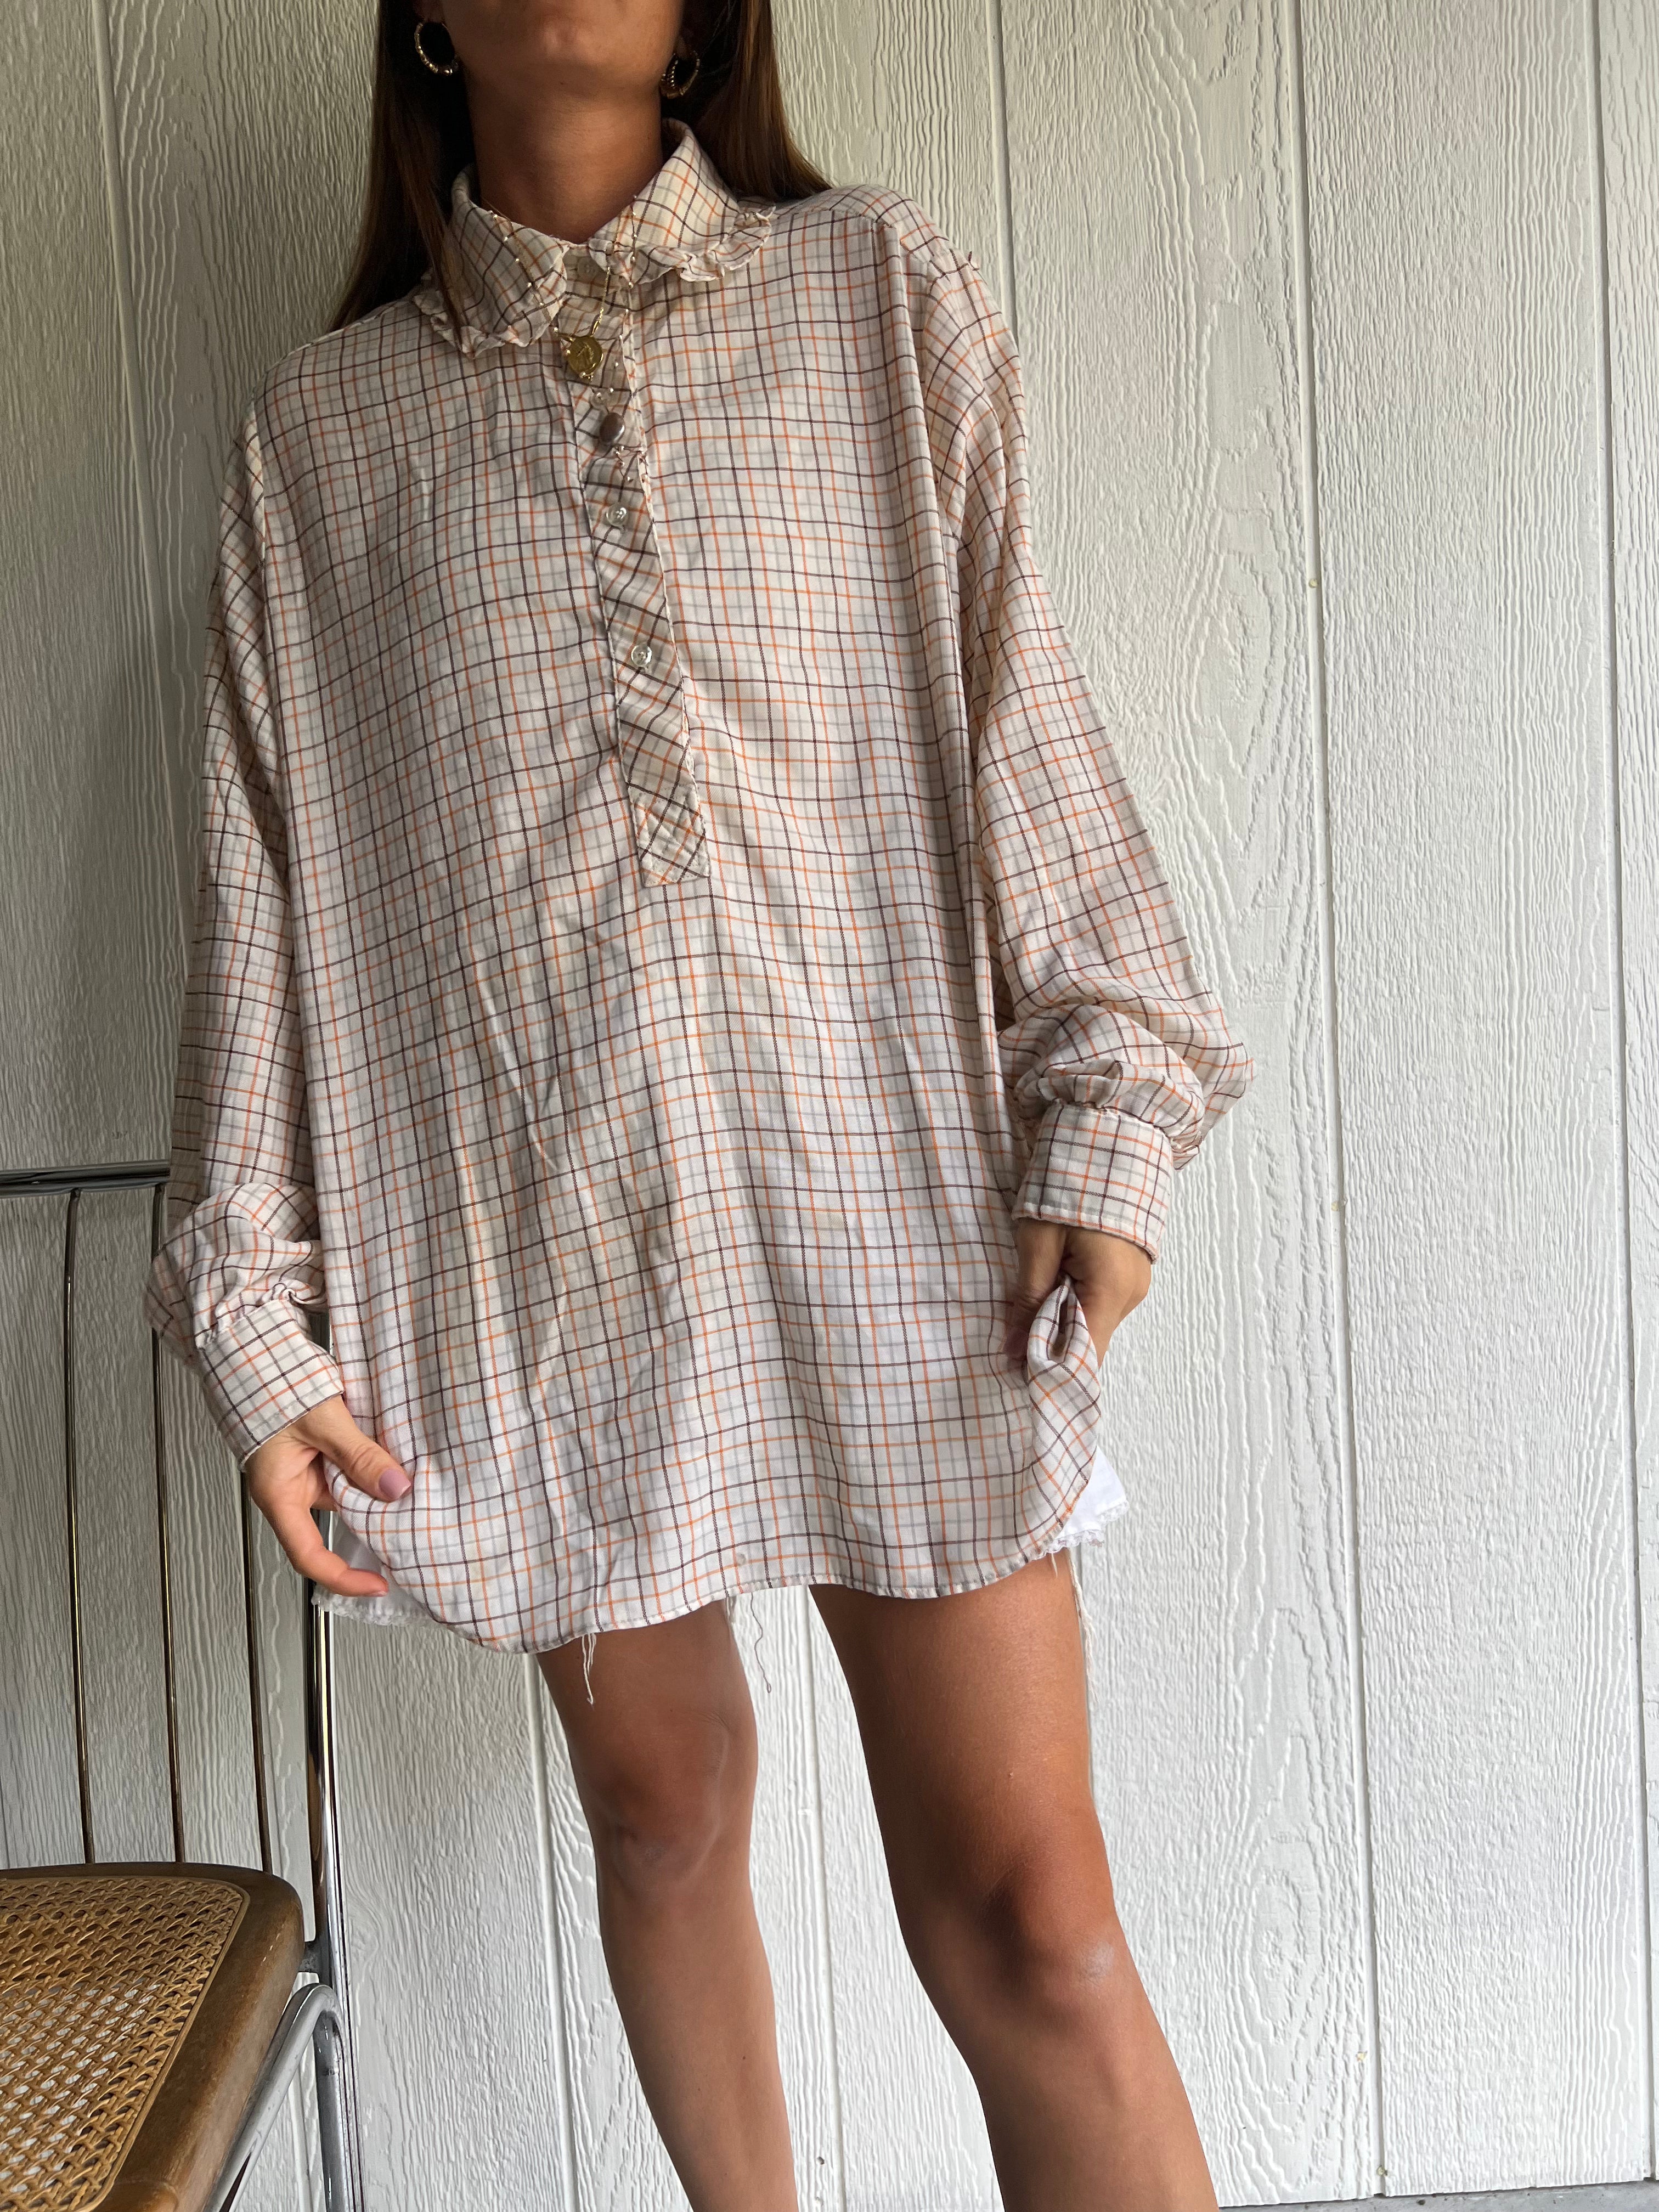 Orange and Brown Checkered Blouse